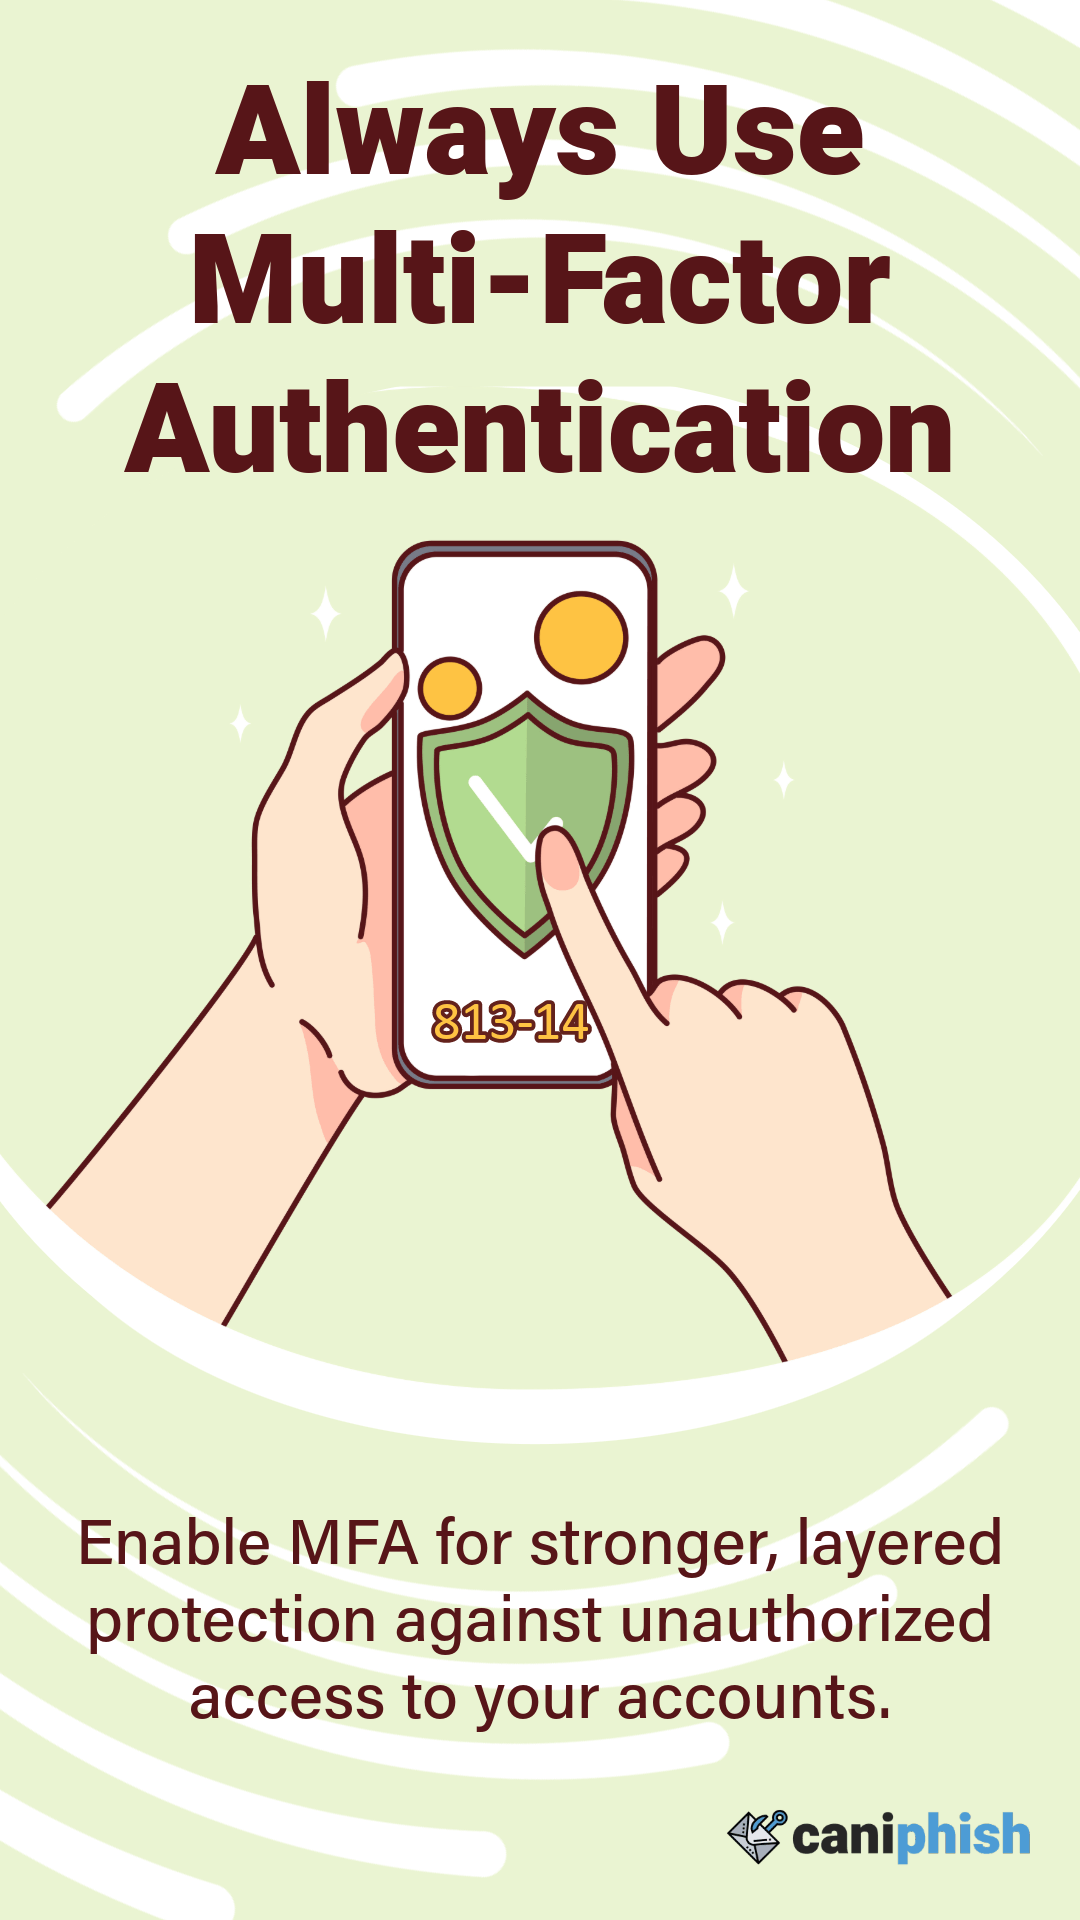 Poster depicting why multi-factor authentication is important.